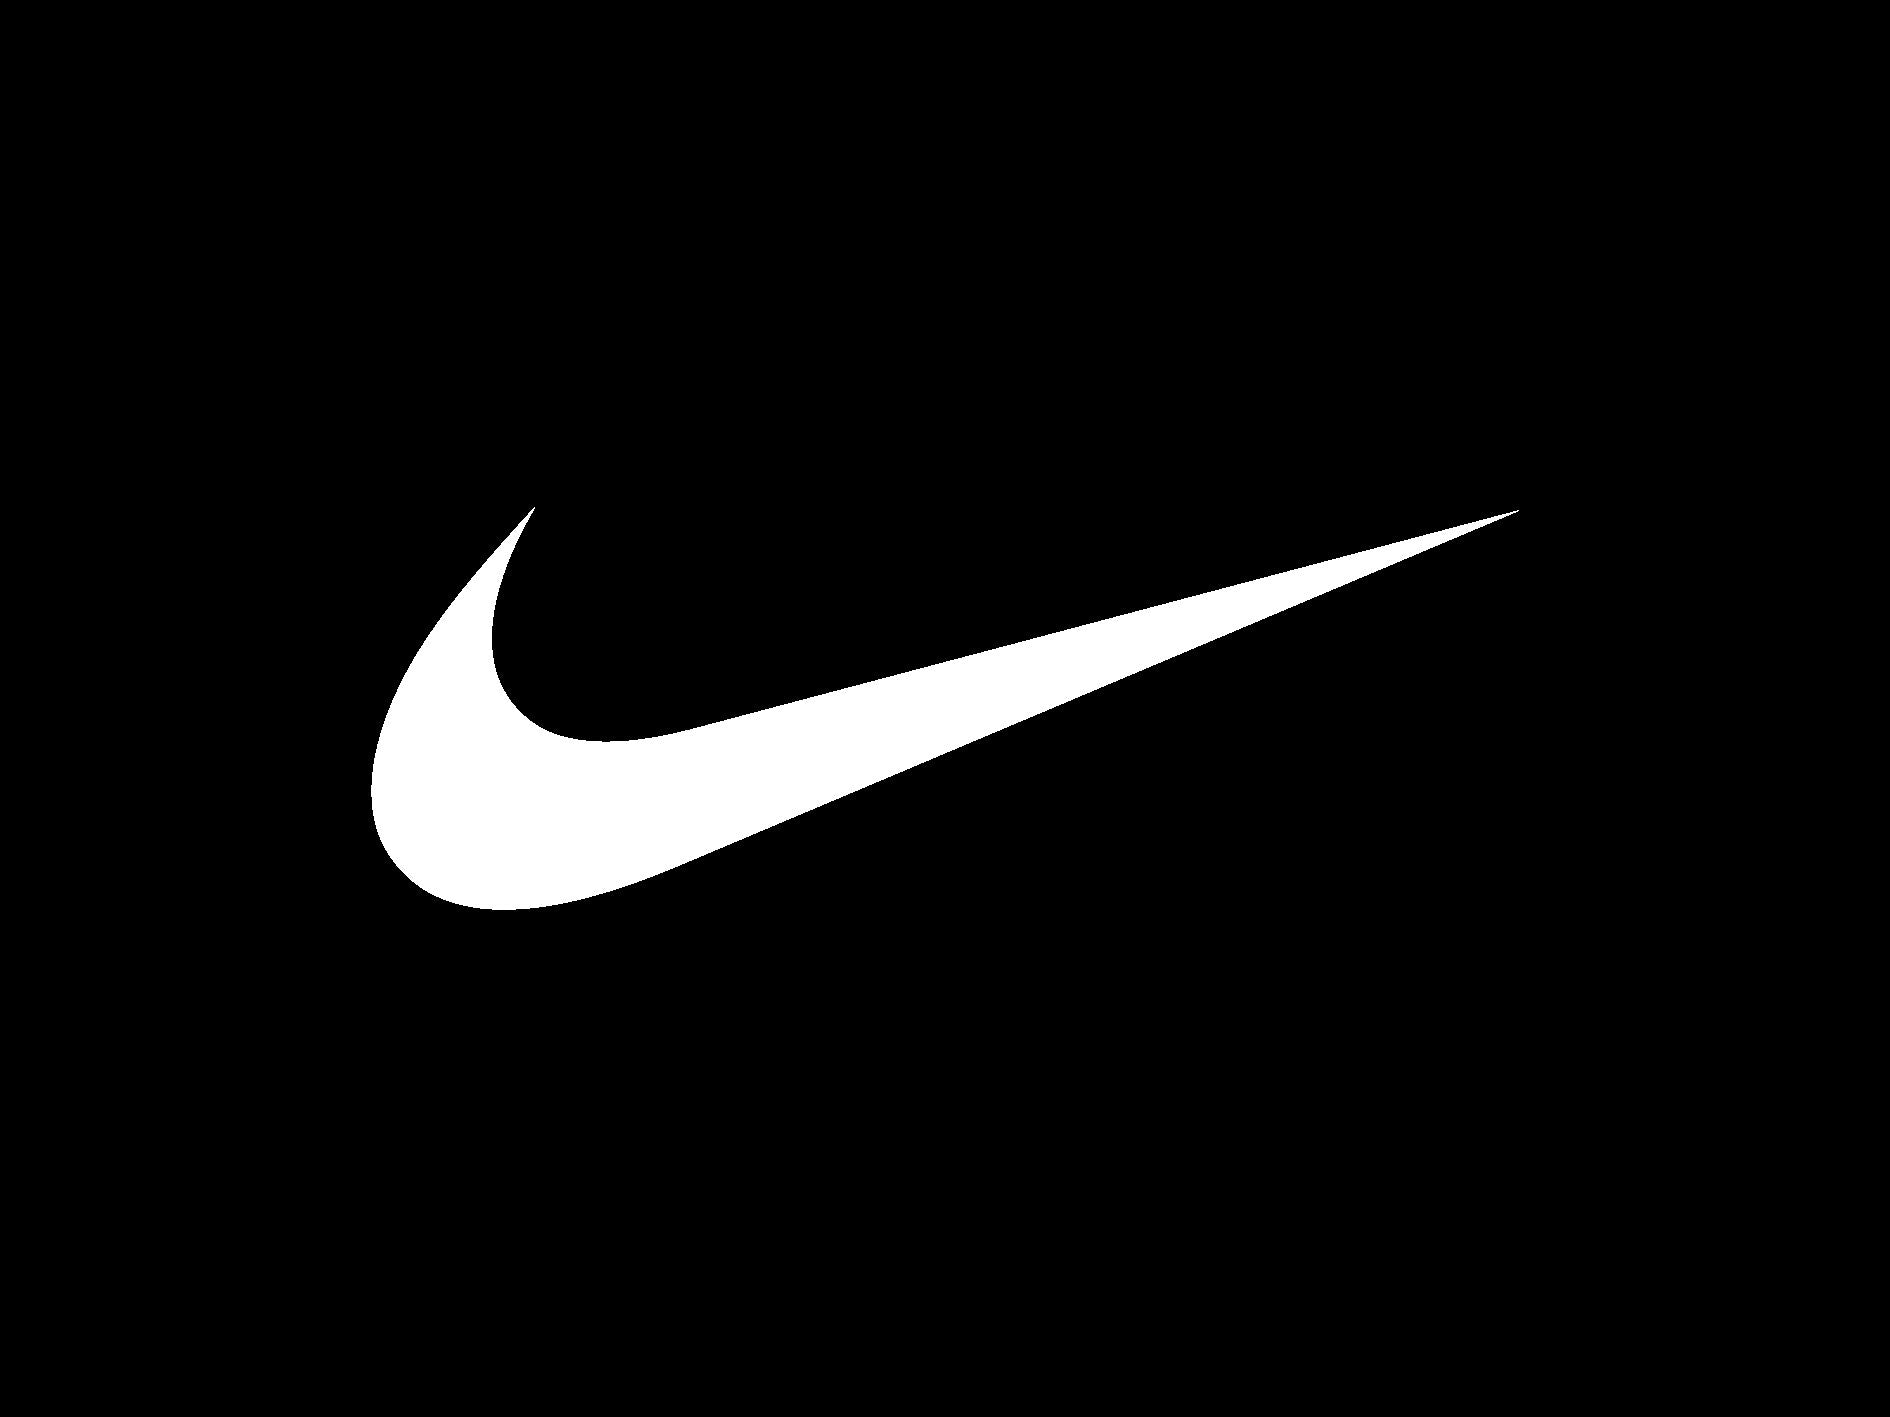 nike logo for clothes